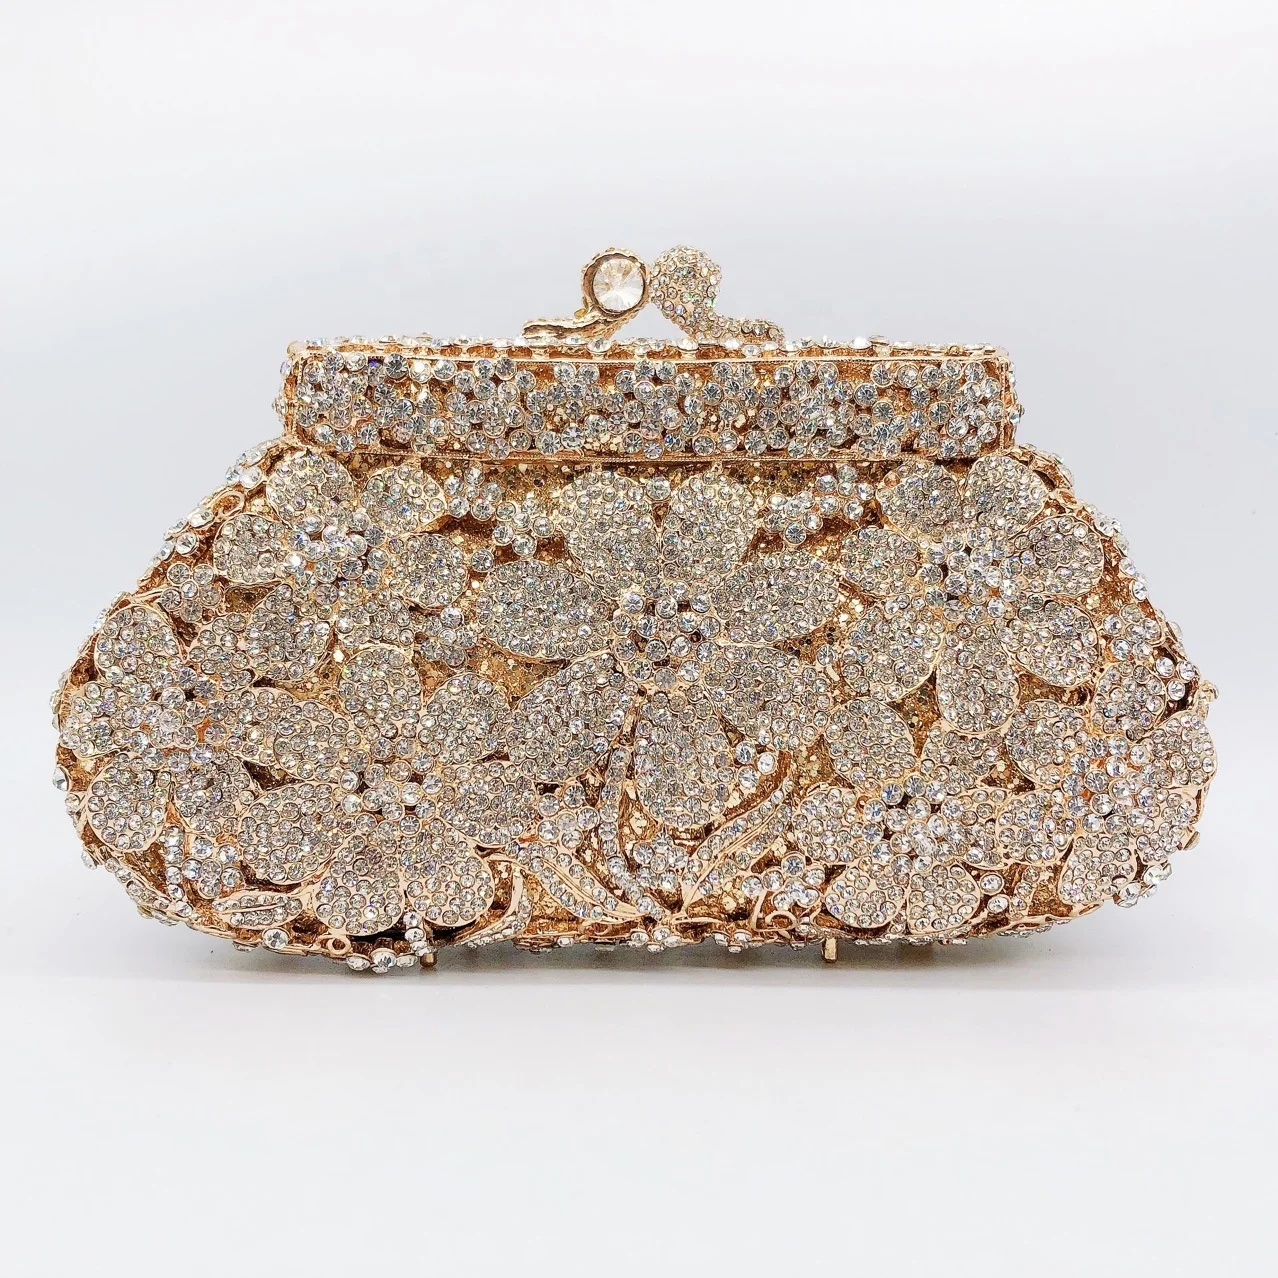 Amiqi MRY74 Beautiful Chain Diamond Rhinestone Evening Clutch Crystal Purse Bling Glitter Gold Bags For Evening Parties